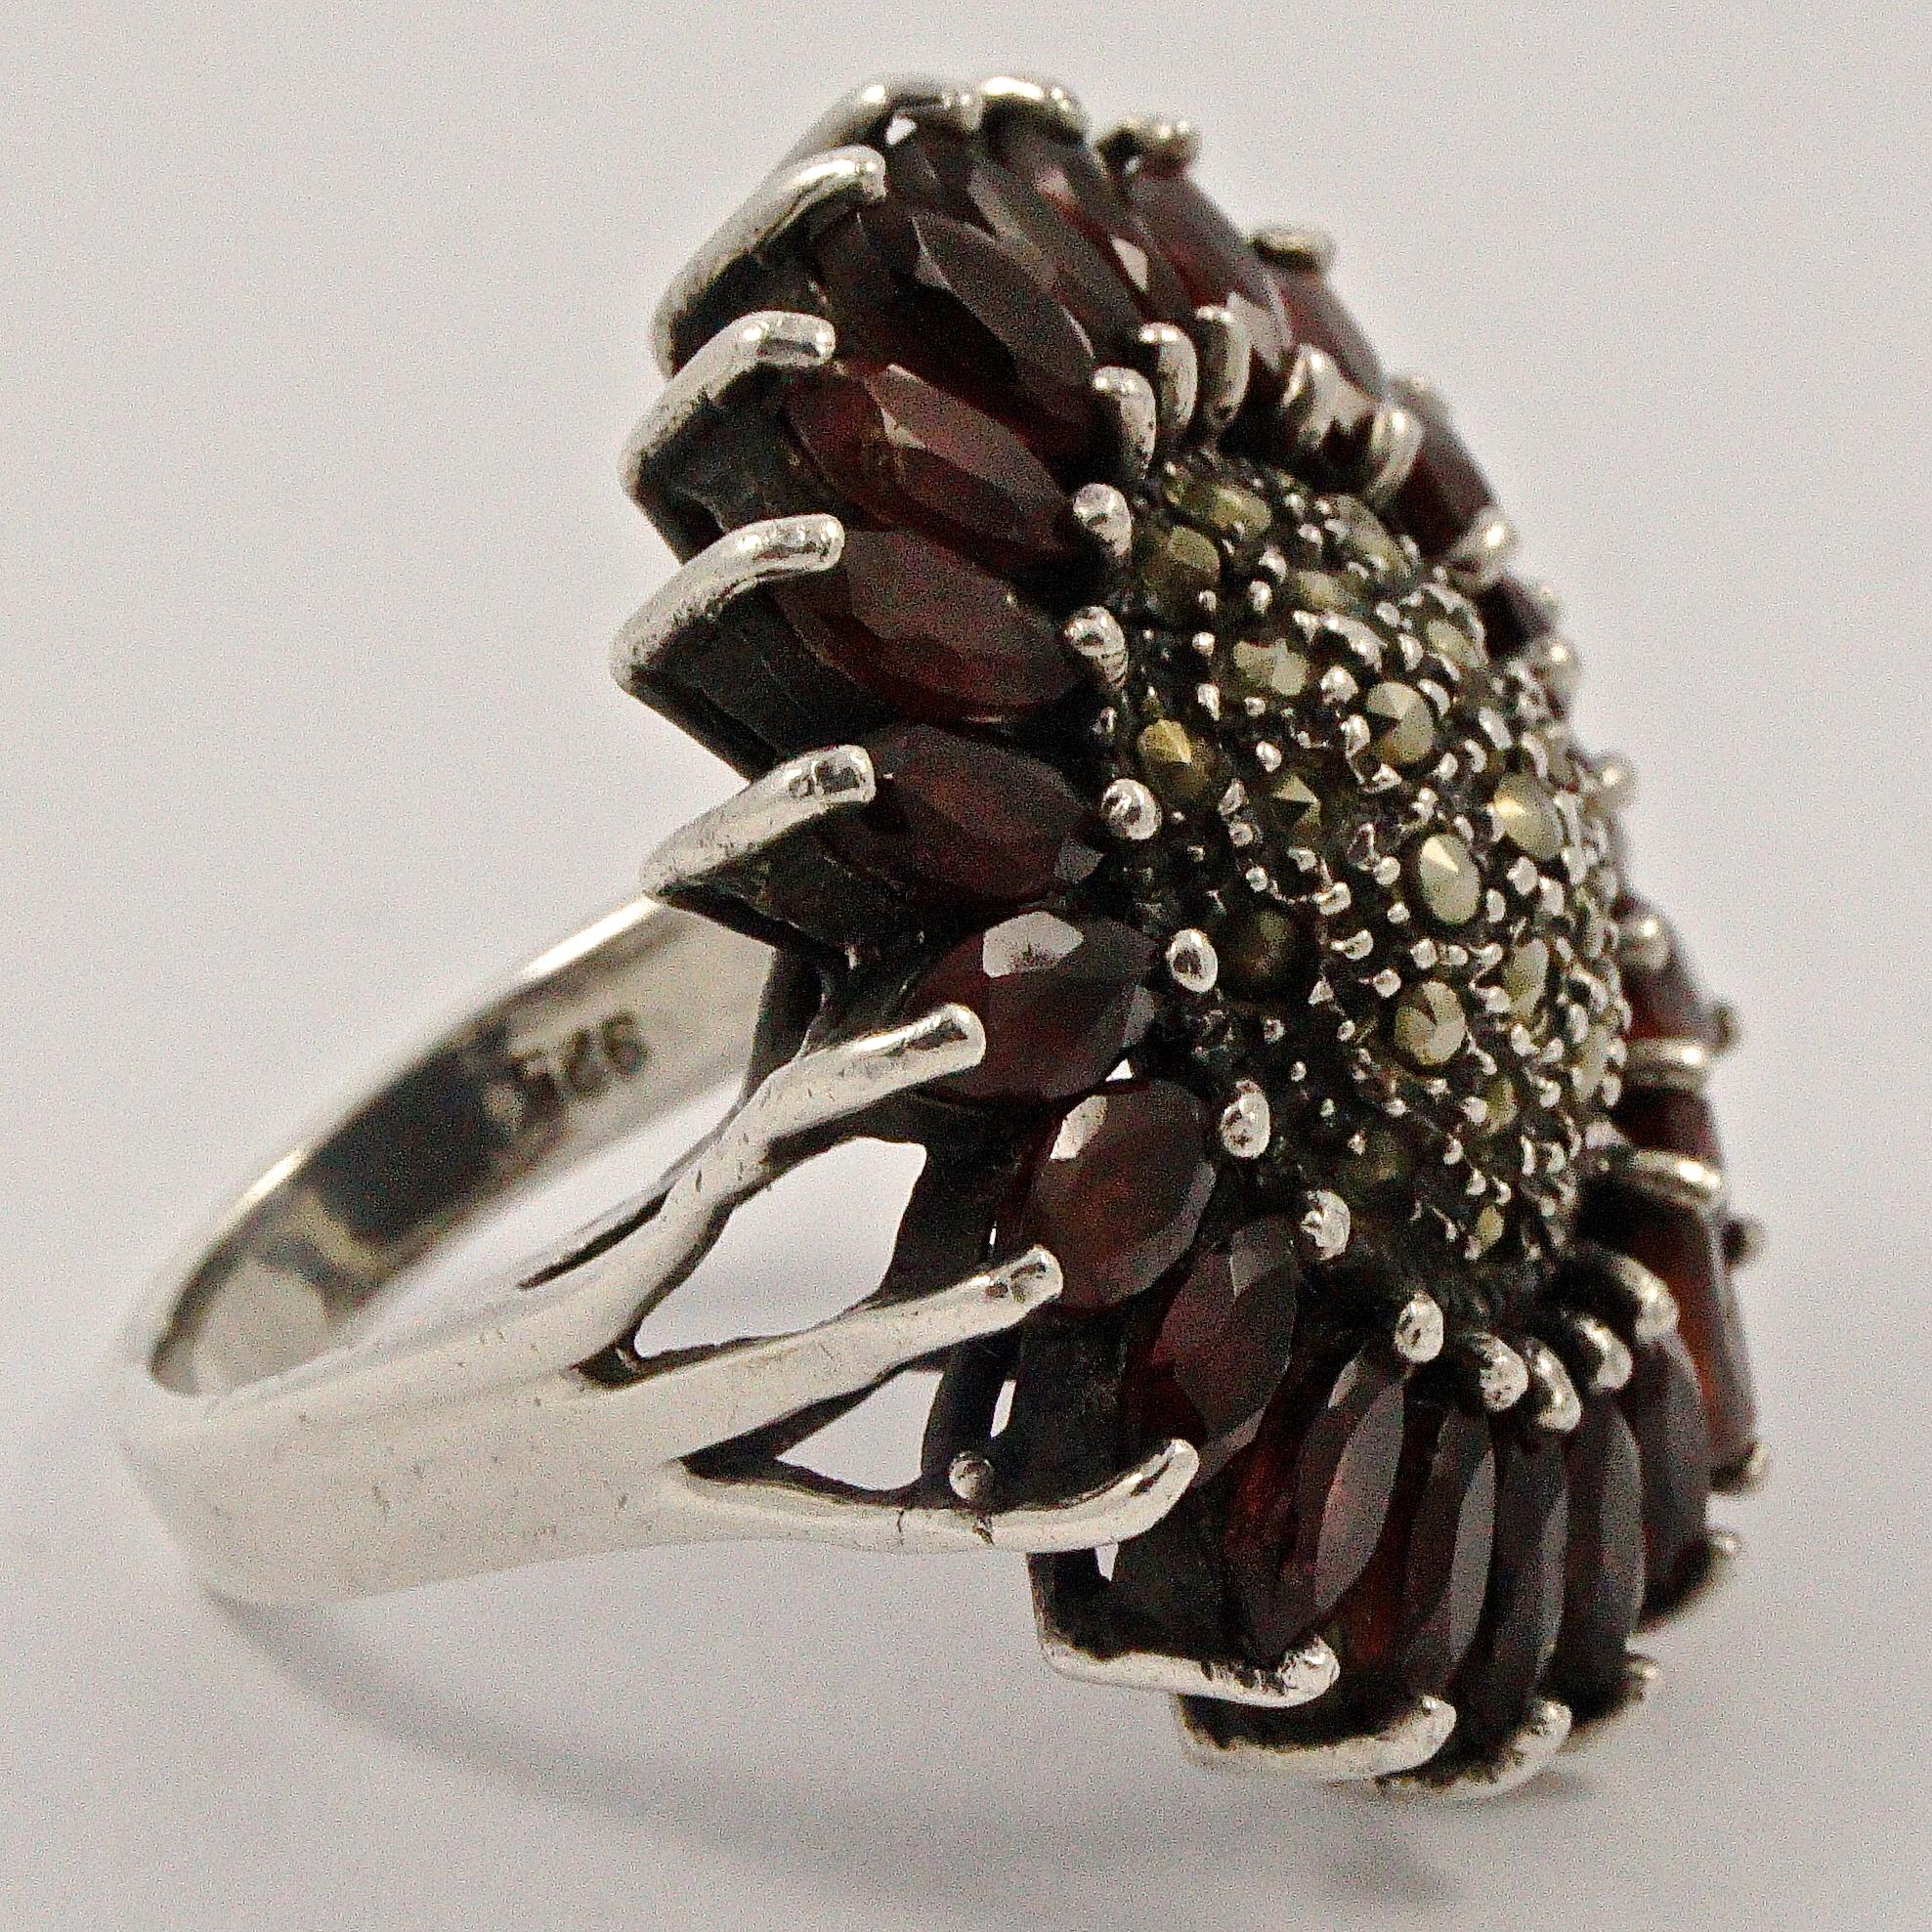 Silver statement ring featuring a lovely flower design set with garnets and marcasites. Ring size UK O 1/2, US 7 1/4, inside diameter 1.85cm / .72 inch. The front measures diameter 3.1cm / 1.22 inches. The back and sides are finished with a black